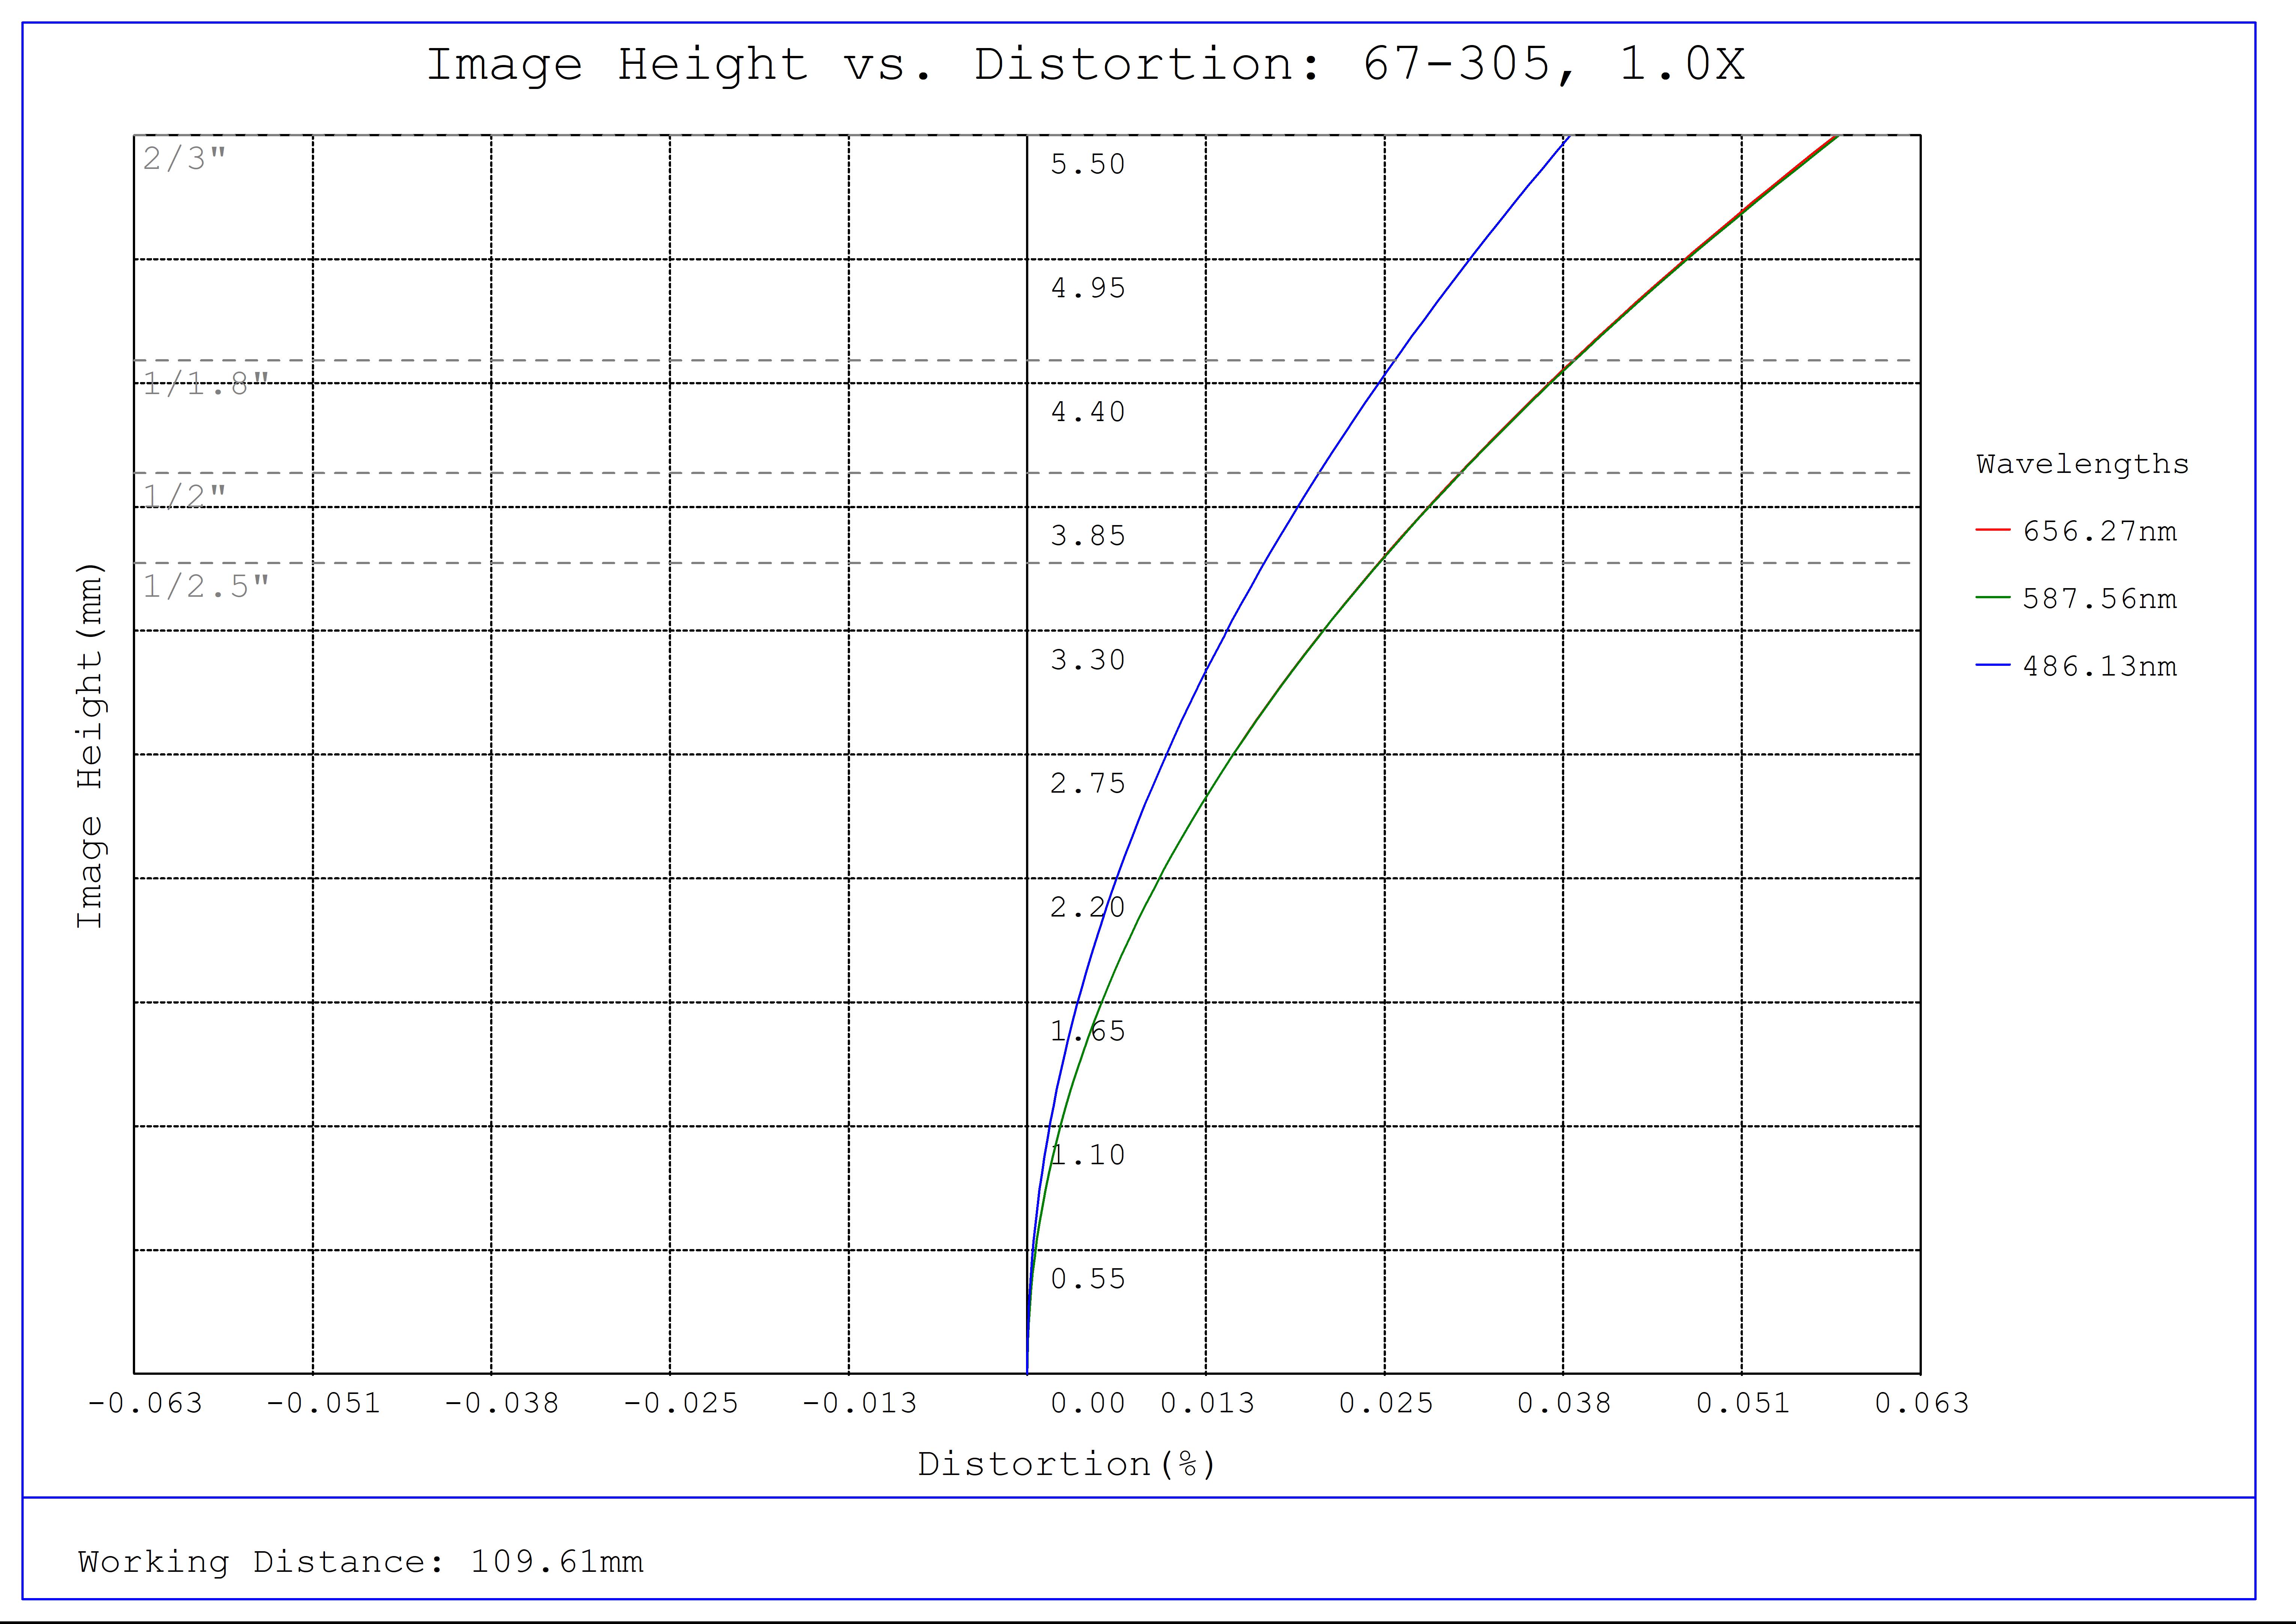 #67-305, 1X, 110mm WD, In-Line CompactTL™ Telecentric Lens, Distortion Plot